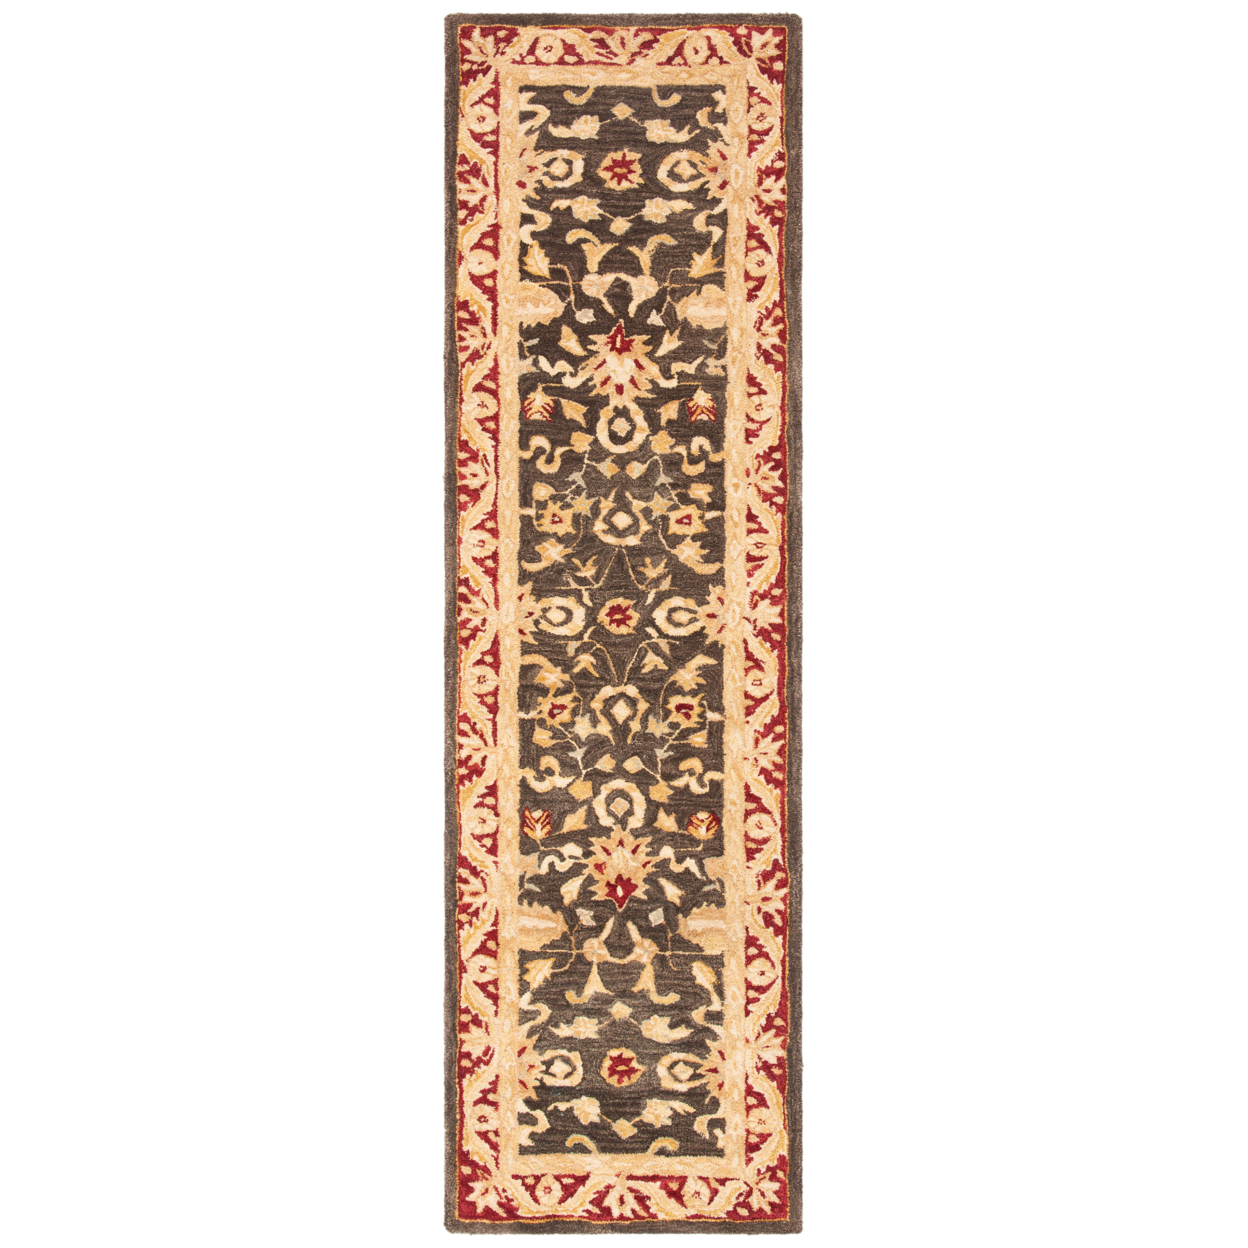 Safavieh Anatolia Spencer Traditional Wool Runner Rug, Charcoal/Red, 2'3" x 10' - image 5 of 10